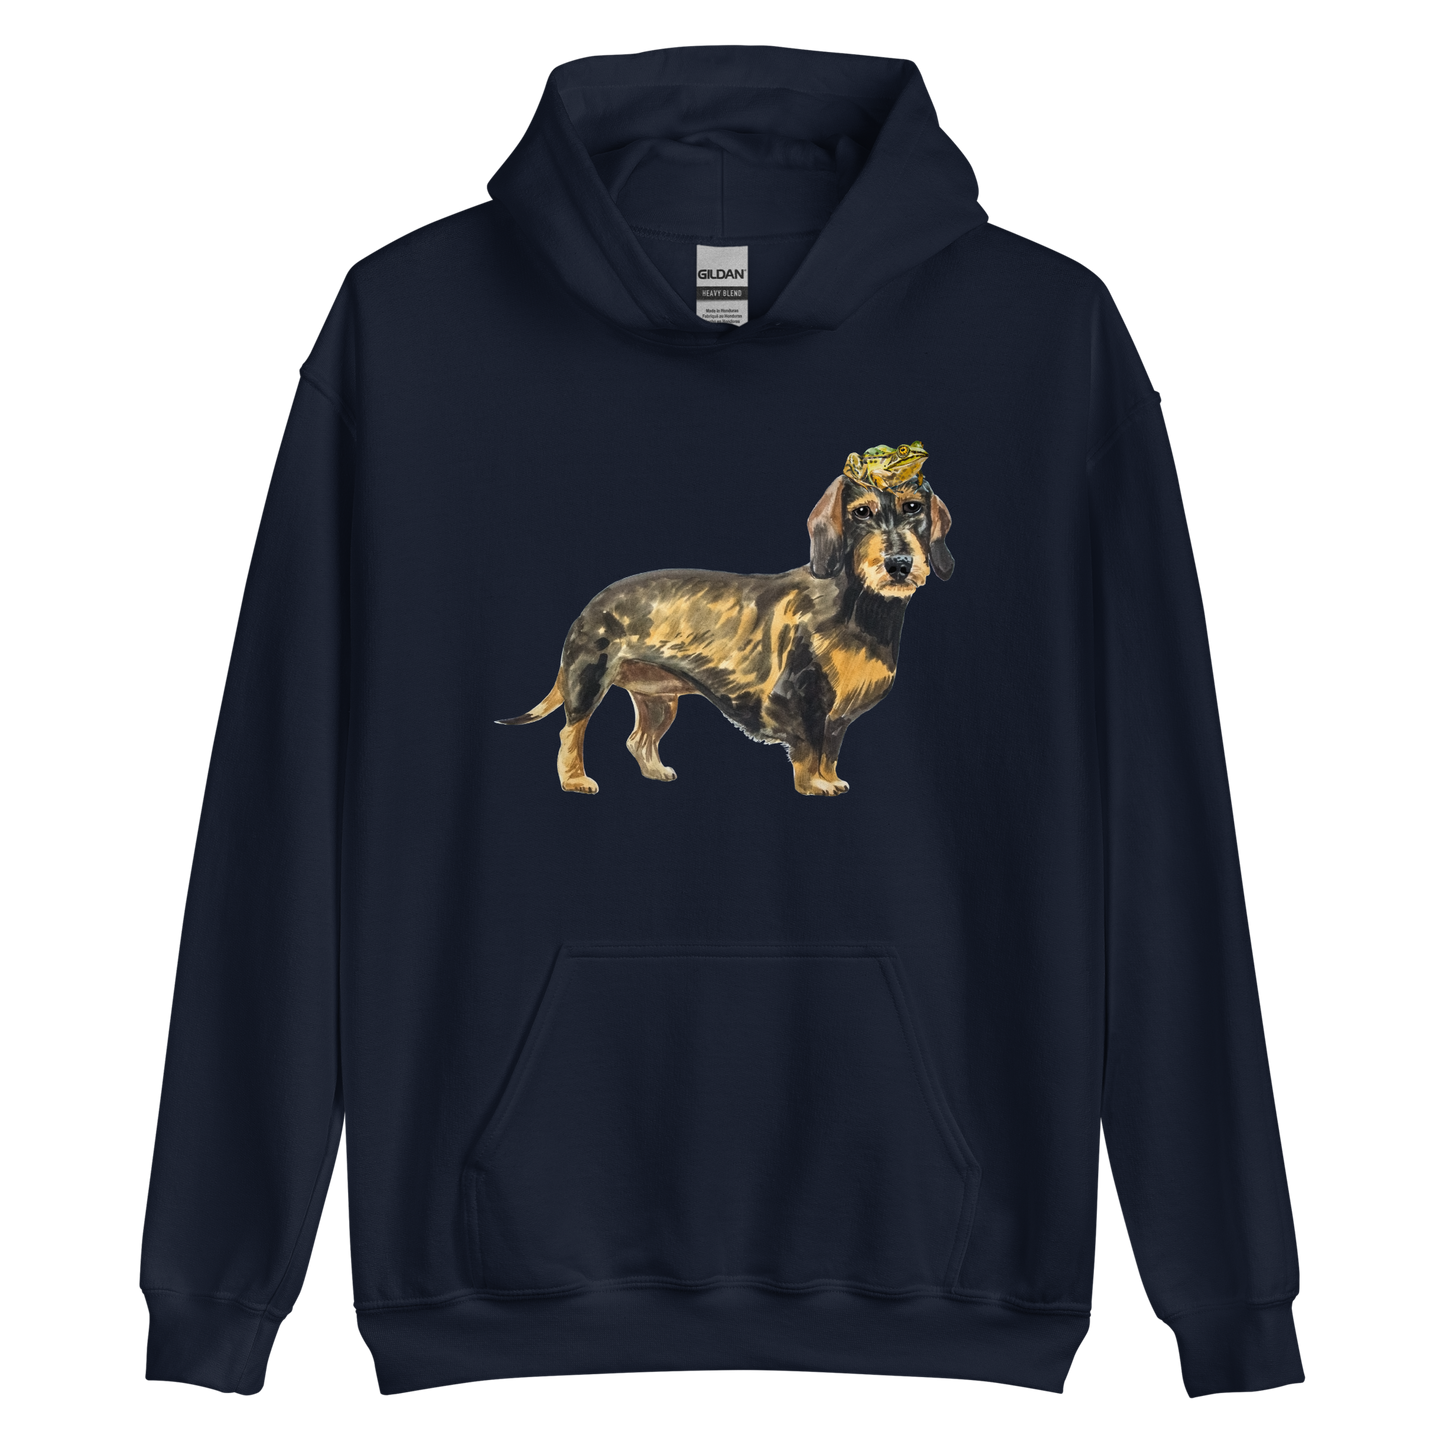 Navy Dachshund Hoodie featuring an adorable Frog on a Dachshund's Head graphic on the chest - Cute Graphic Dachshund Hoodies - Boozy Fox